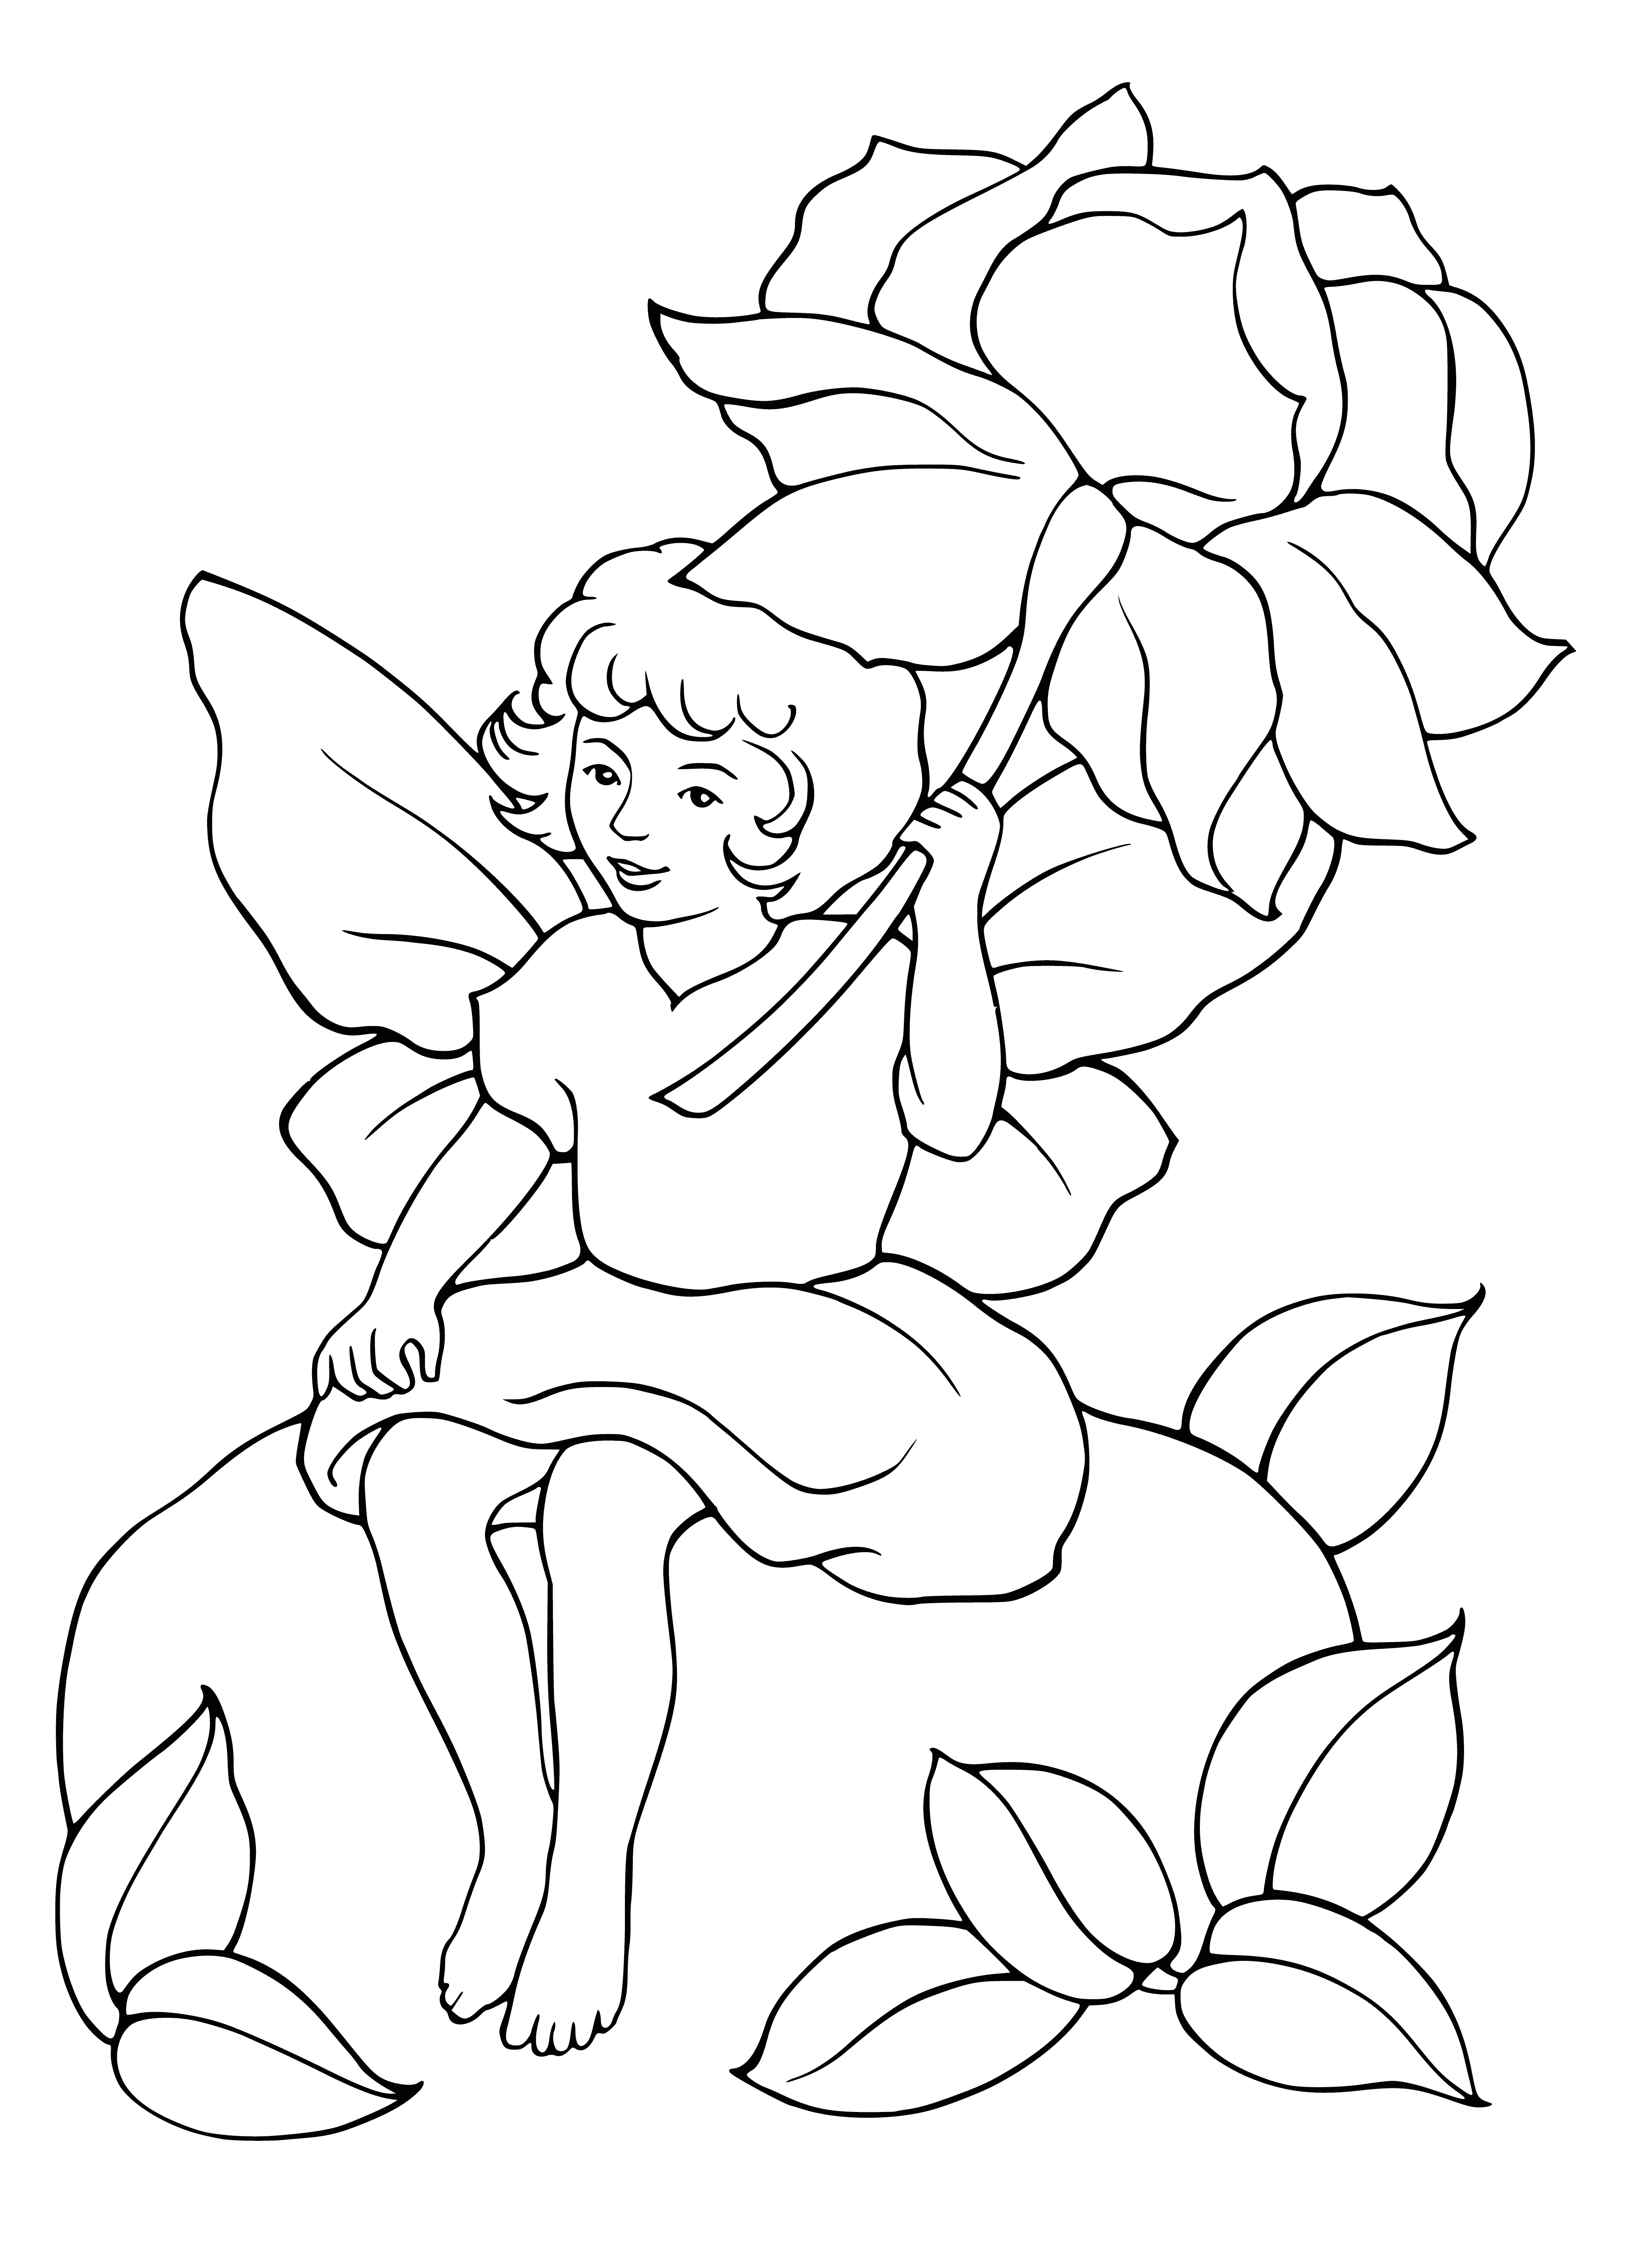 coloring page: Elf in green hat on toadstool has mischievous grin, ready for something fun! #elves